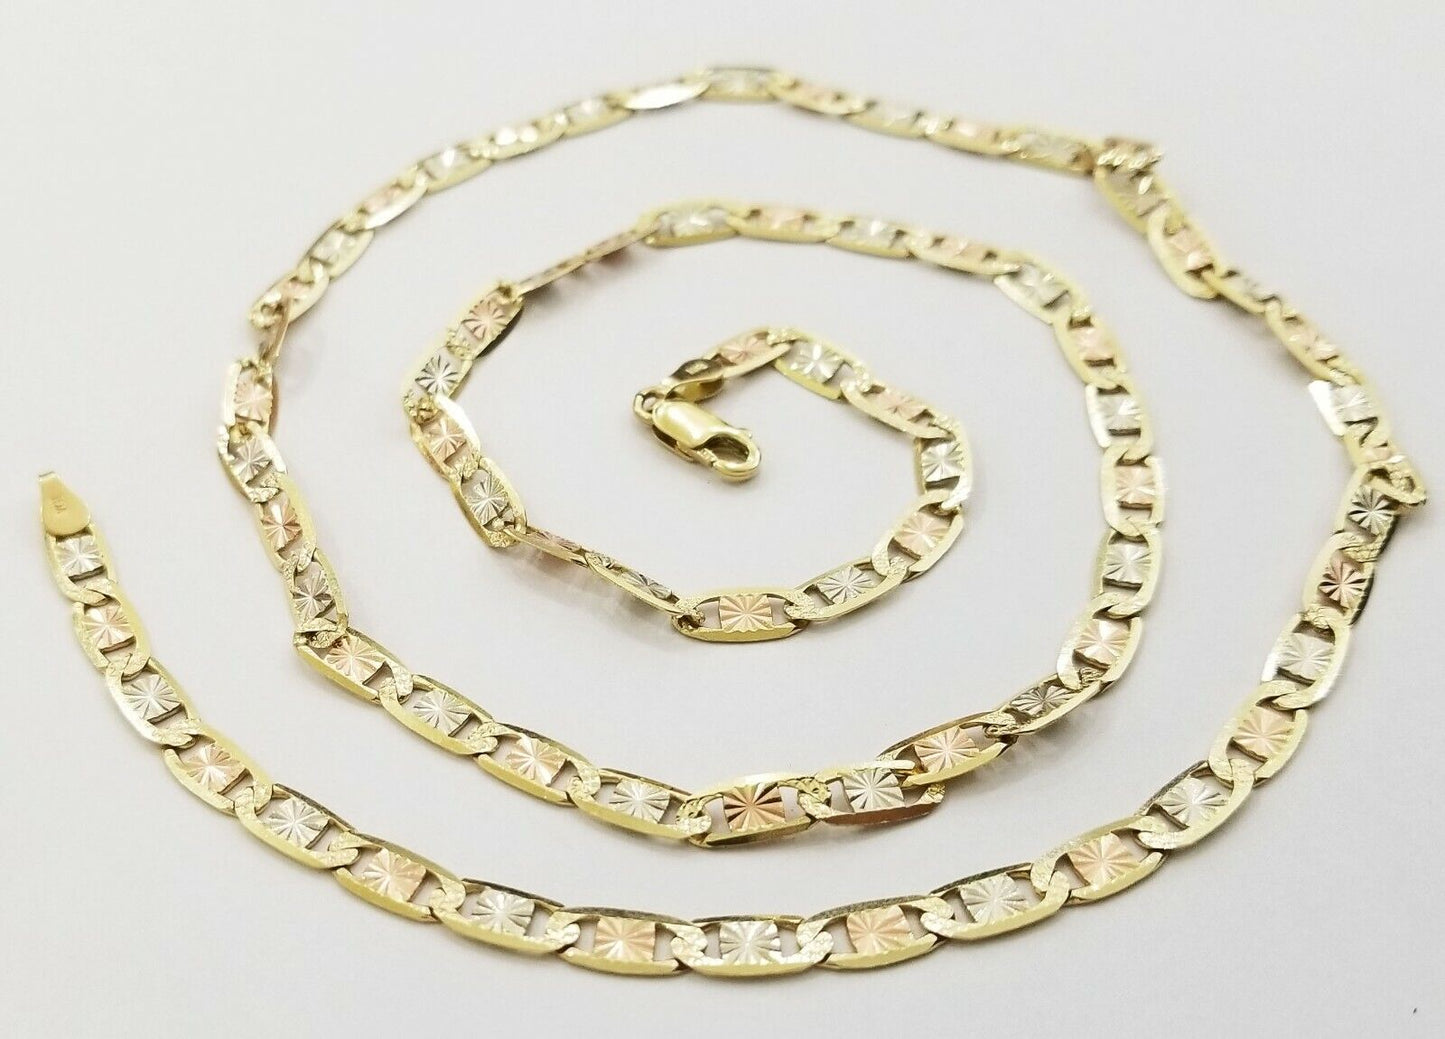 14k valentino Trio  Gold Women's Link chain 26" necklace 5mm with Diamond Cut